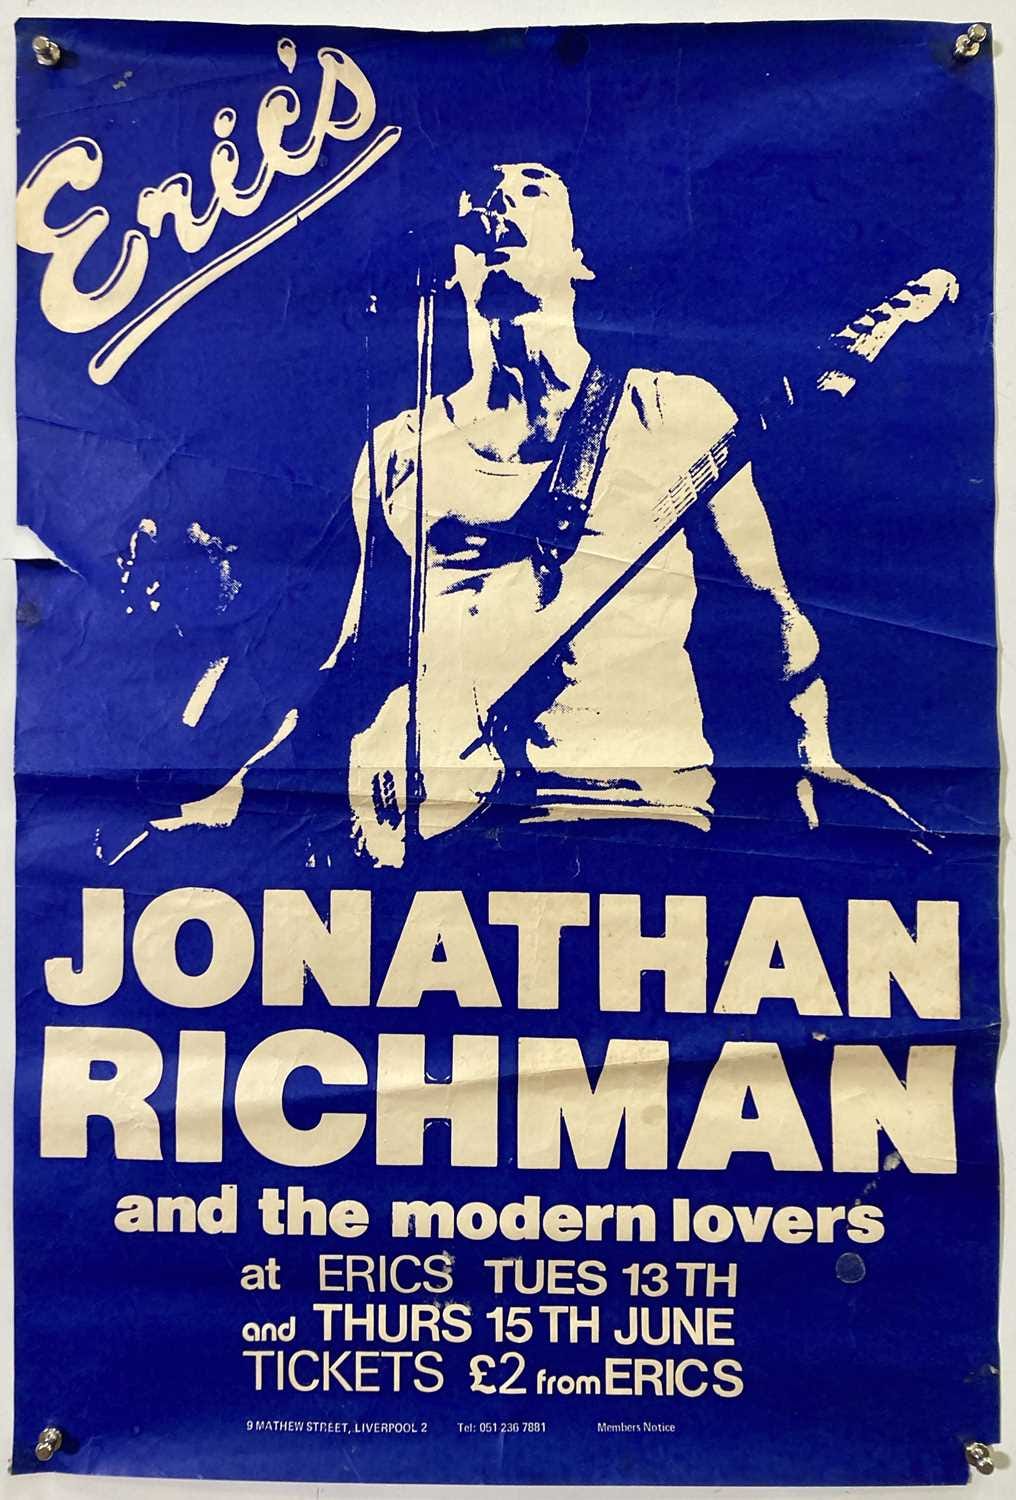 Poster advertising Jonathan Richman and the Modern Lovers at Erics's, Tues 13th and Thurs 15th June (1978). Tickets £2.